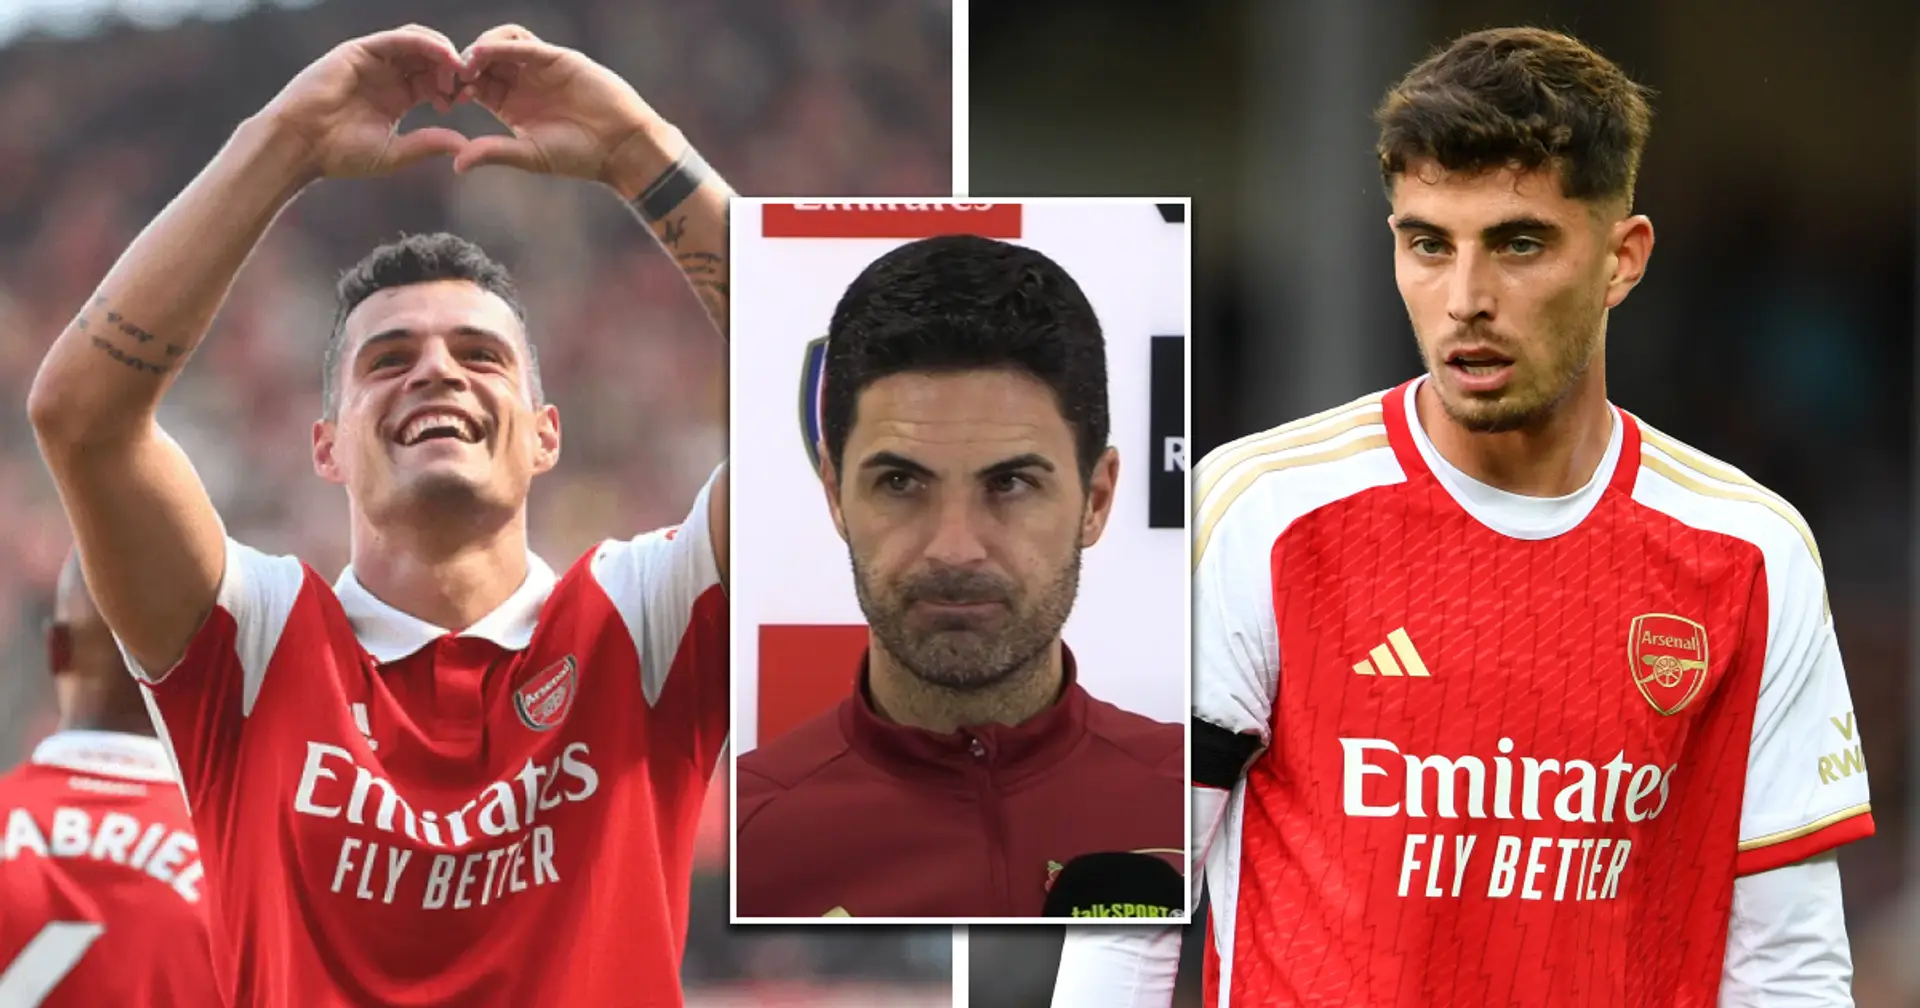 'Xhaka had passion, Havertz acts like he is on a well-paid holiday': Arsenal fans react to Havertz taking over Xhaka's role